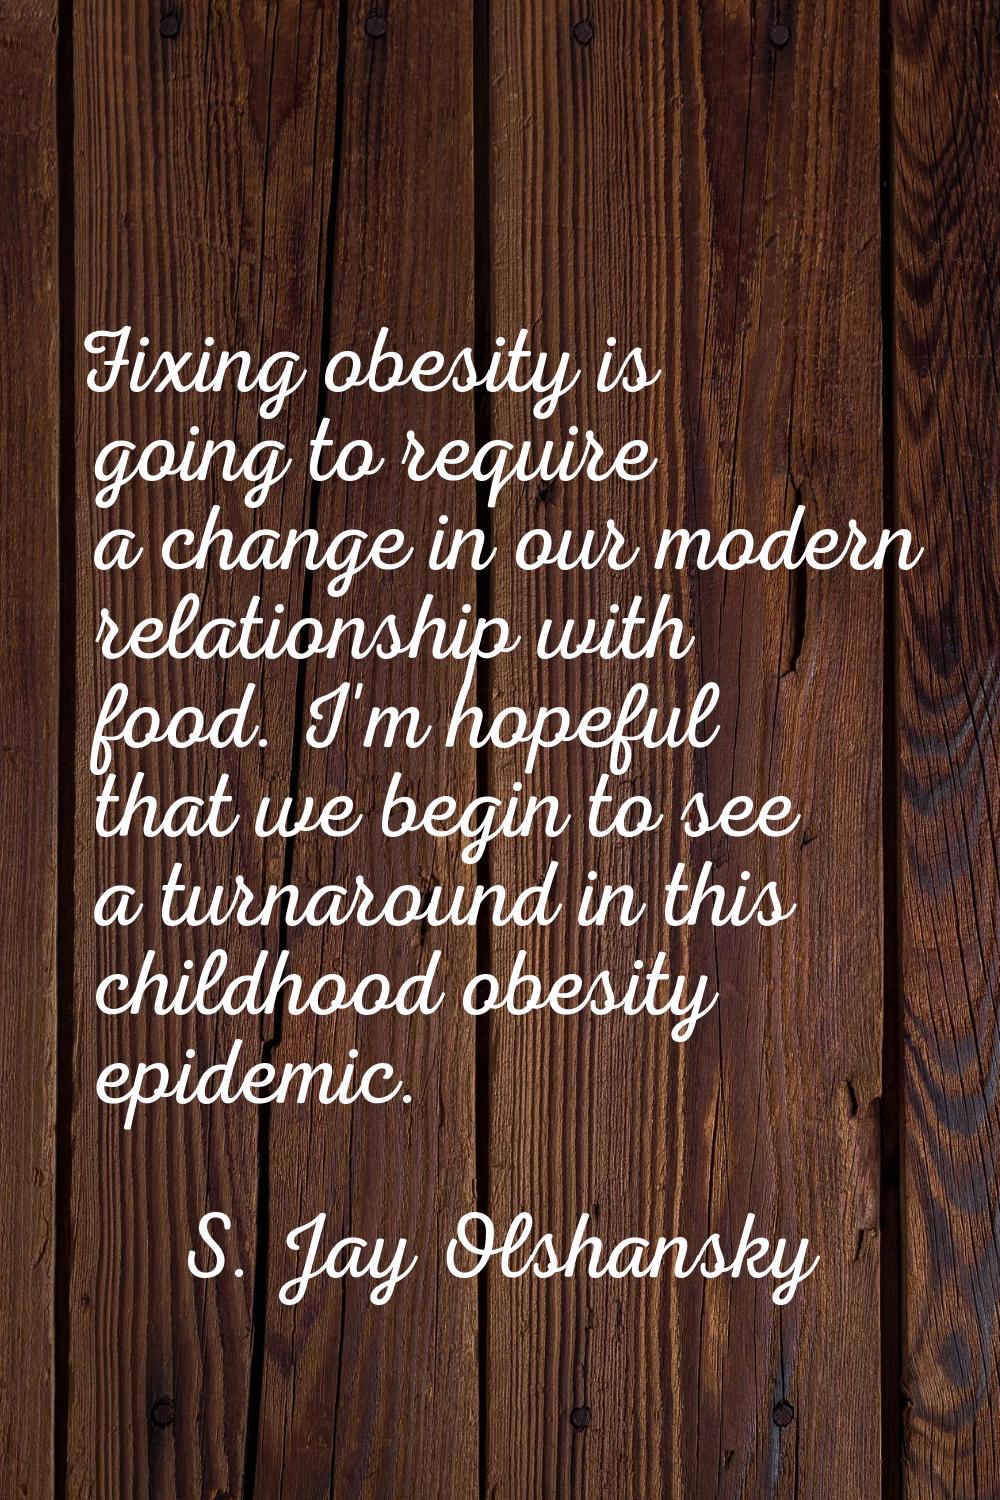 Fixing obesity is going to require a change in our modern relationship with food. I'm hopeful that 